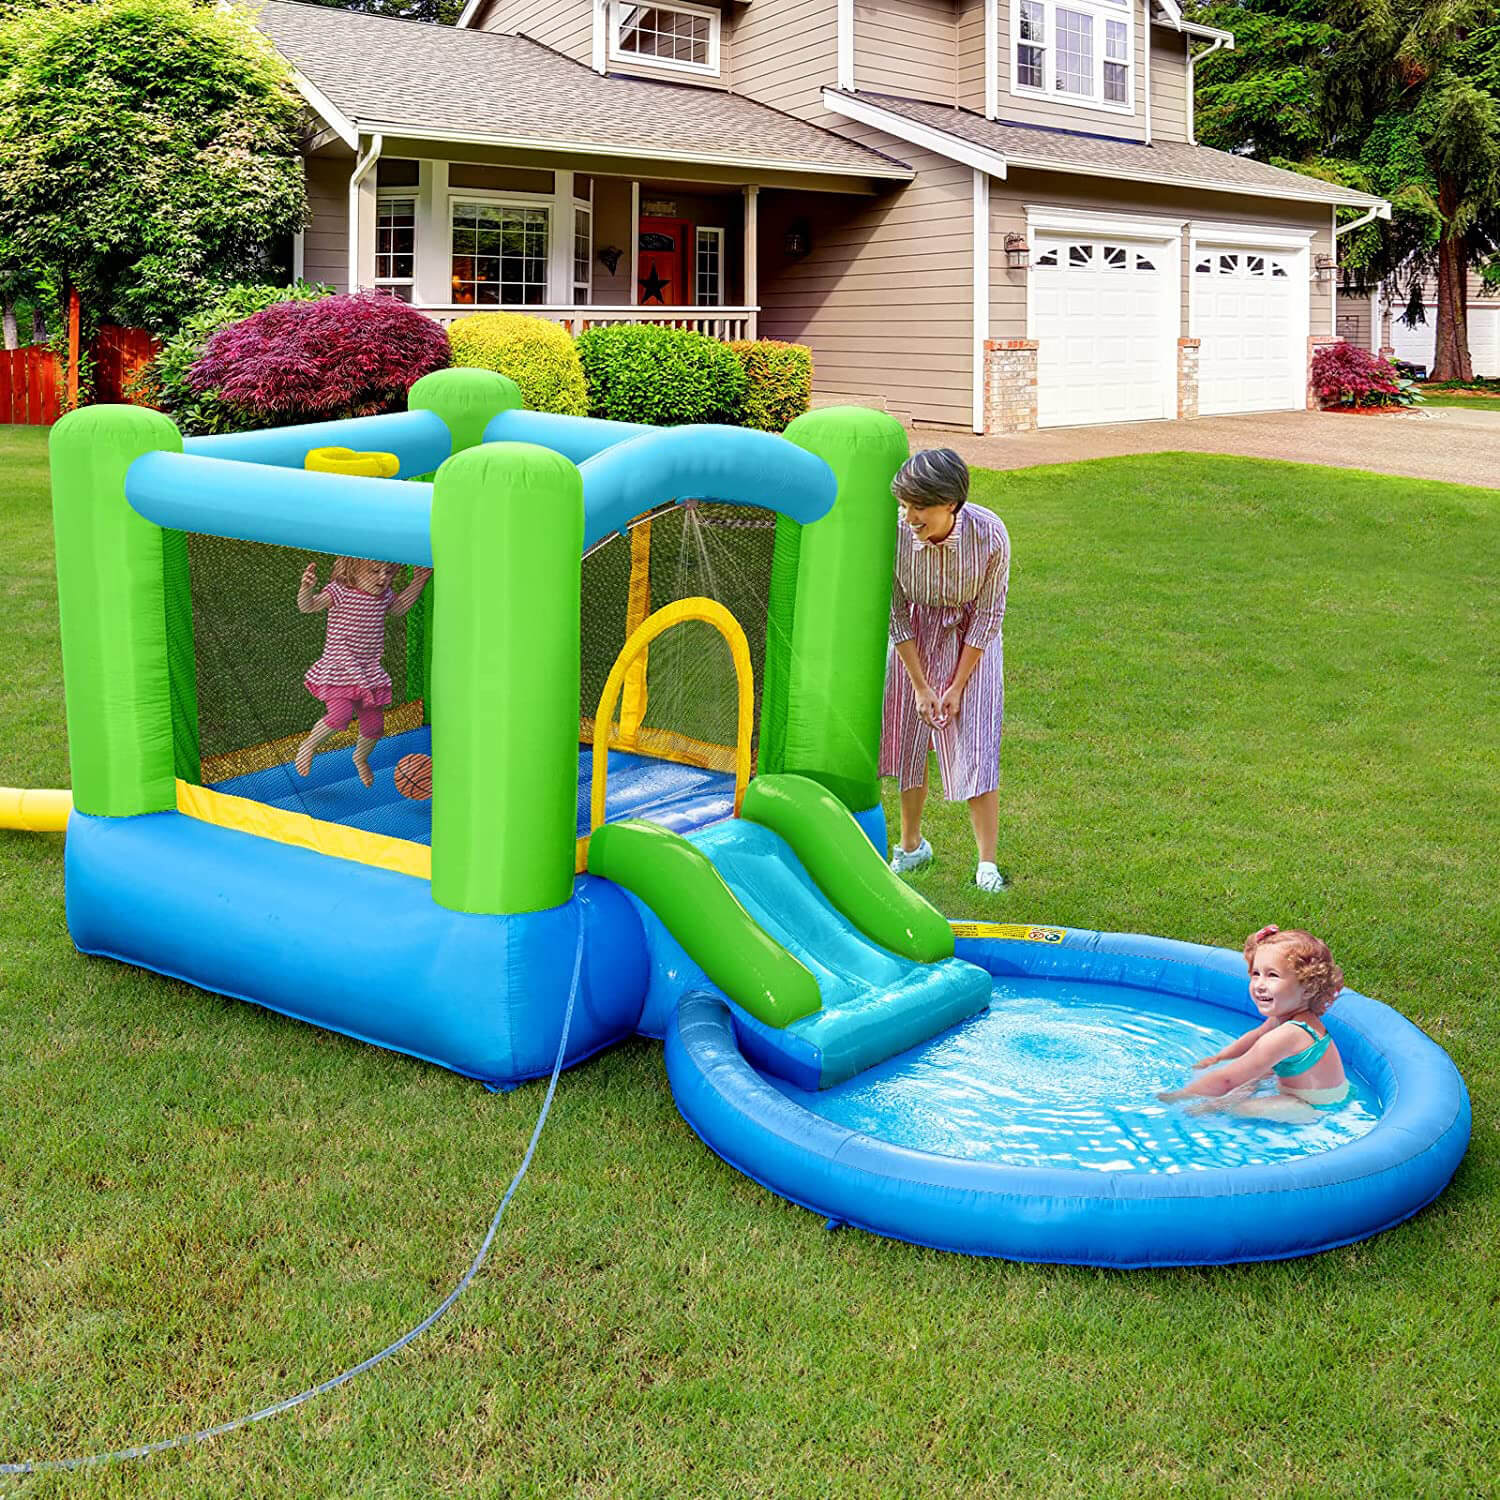 Inflatable Bounce House with Blower - Red / Green